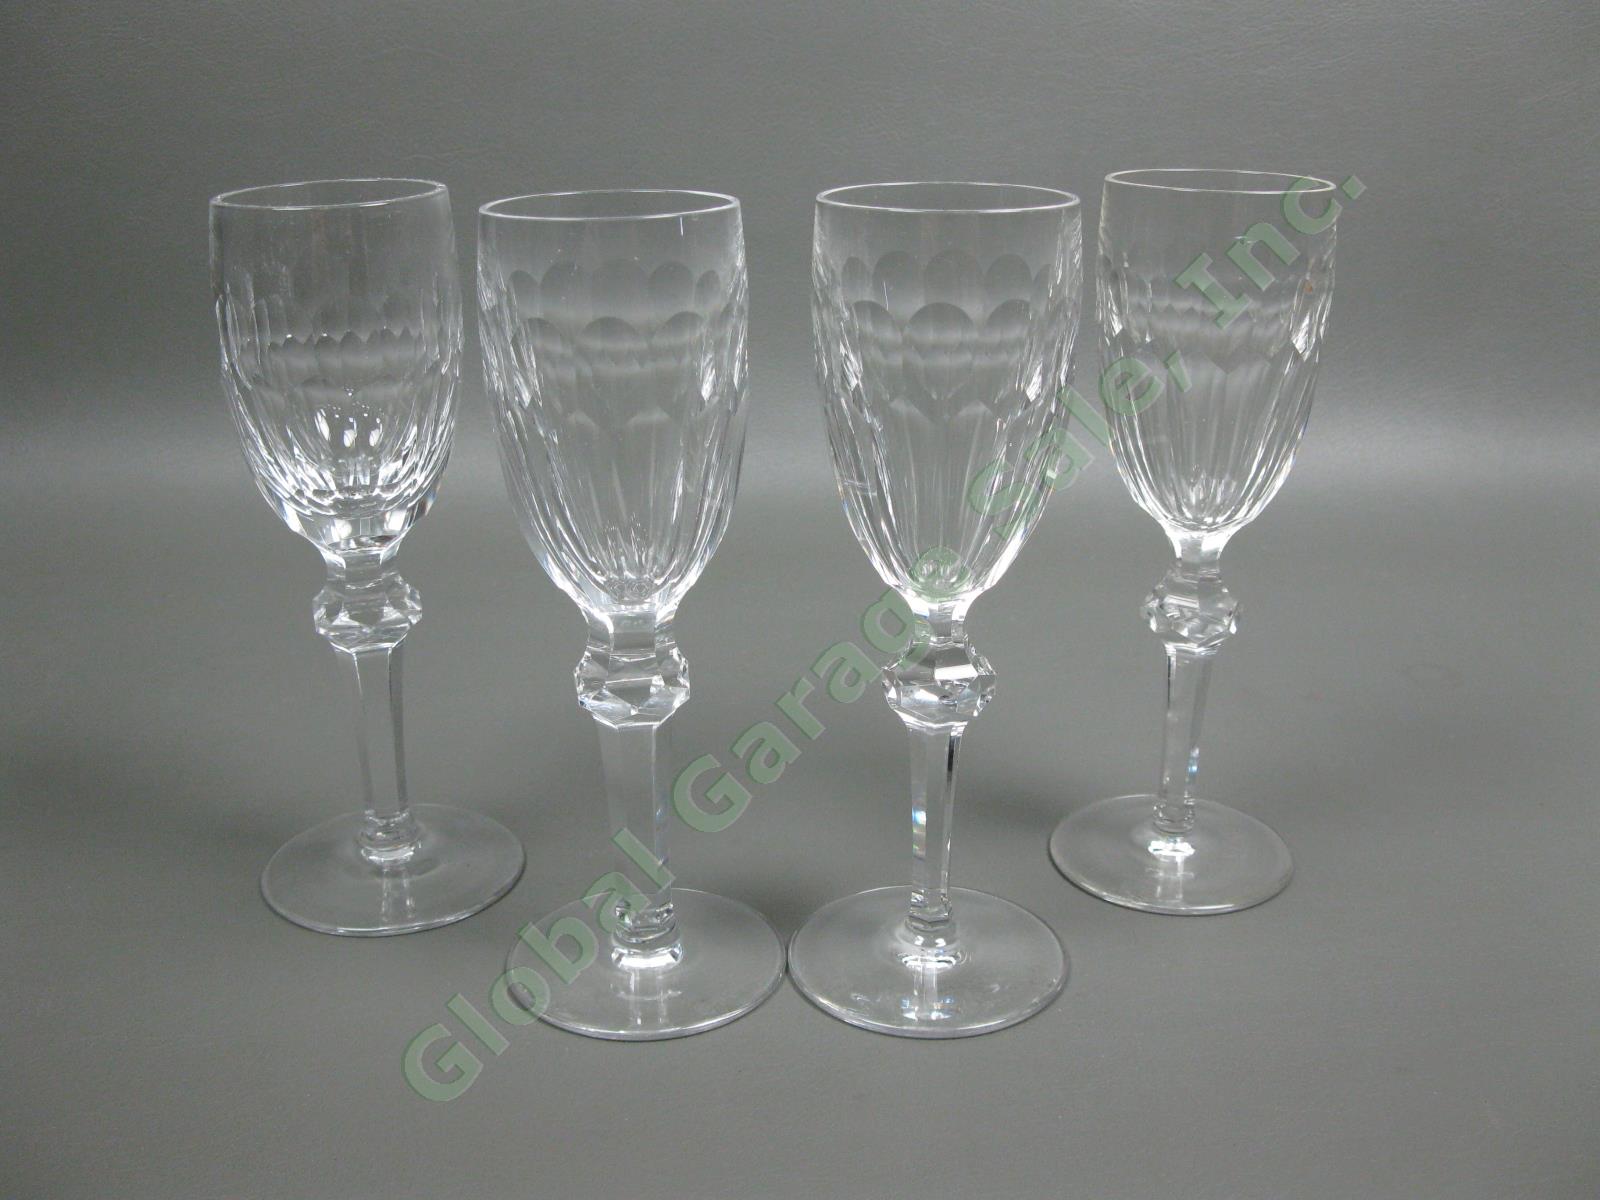 4 Waterford Crystal Curraghmore Sherry Wine Glasses Ireland Blown Cut Glass Set